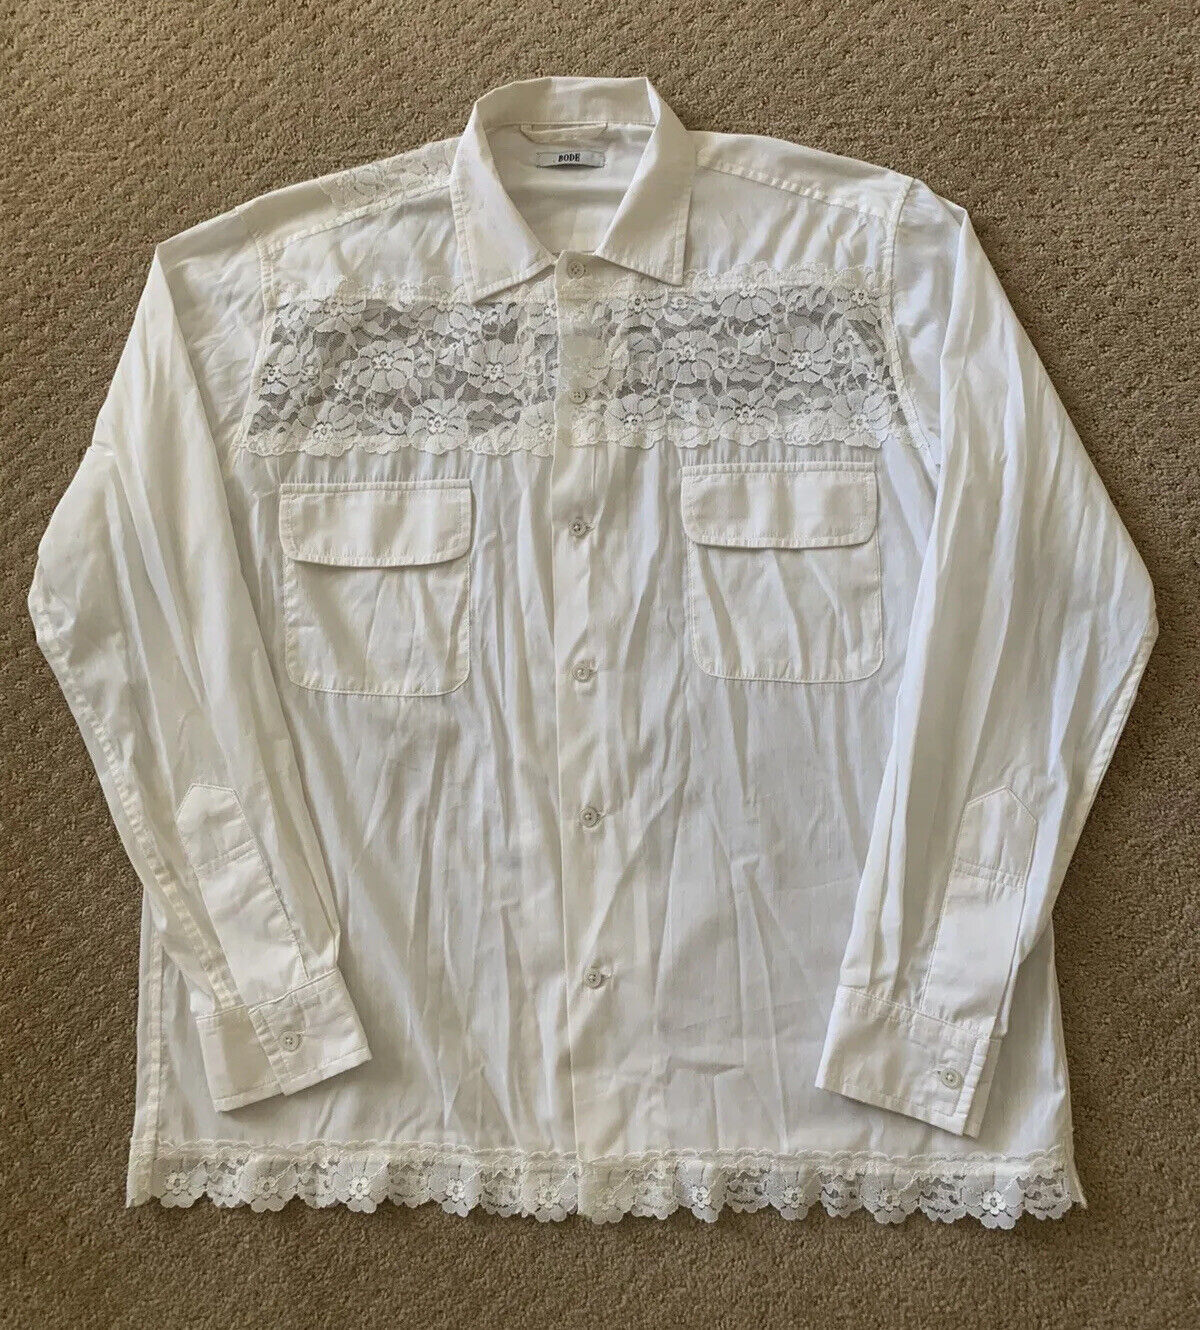 Bode Antique Lace One Of A Kind Button Up Shirt Off White Small Medium